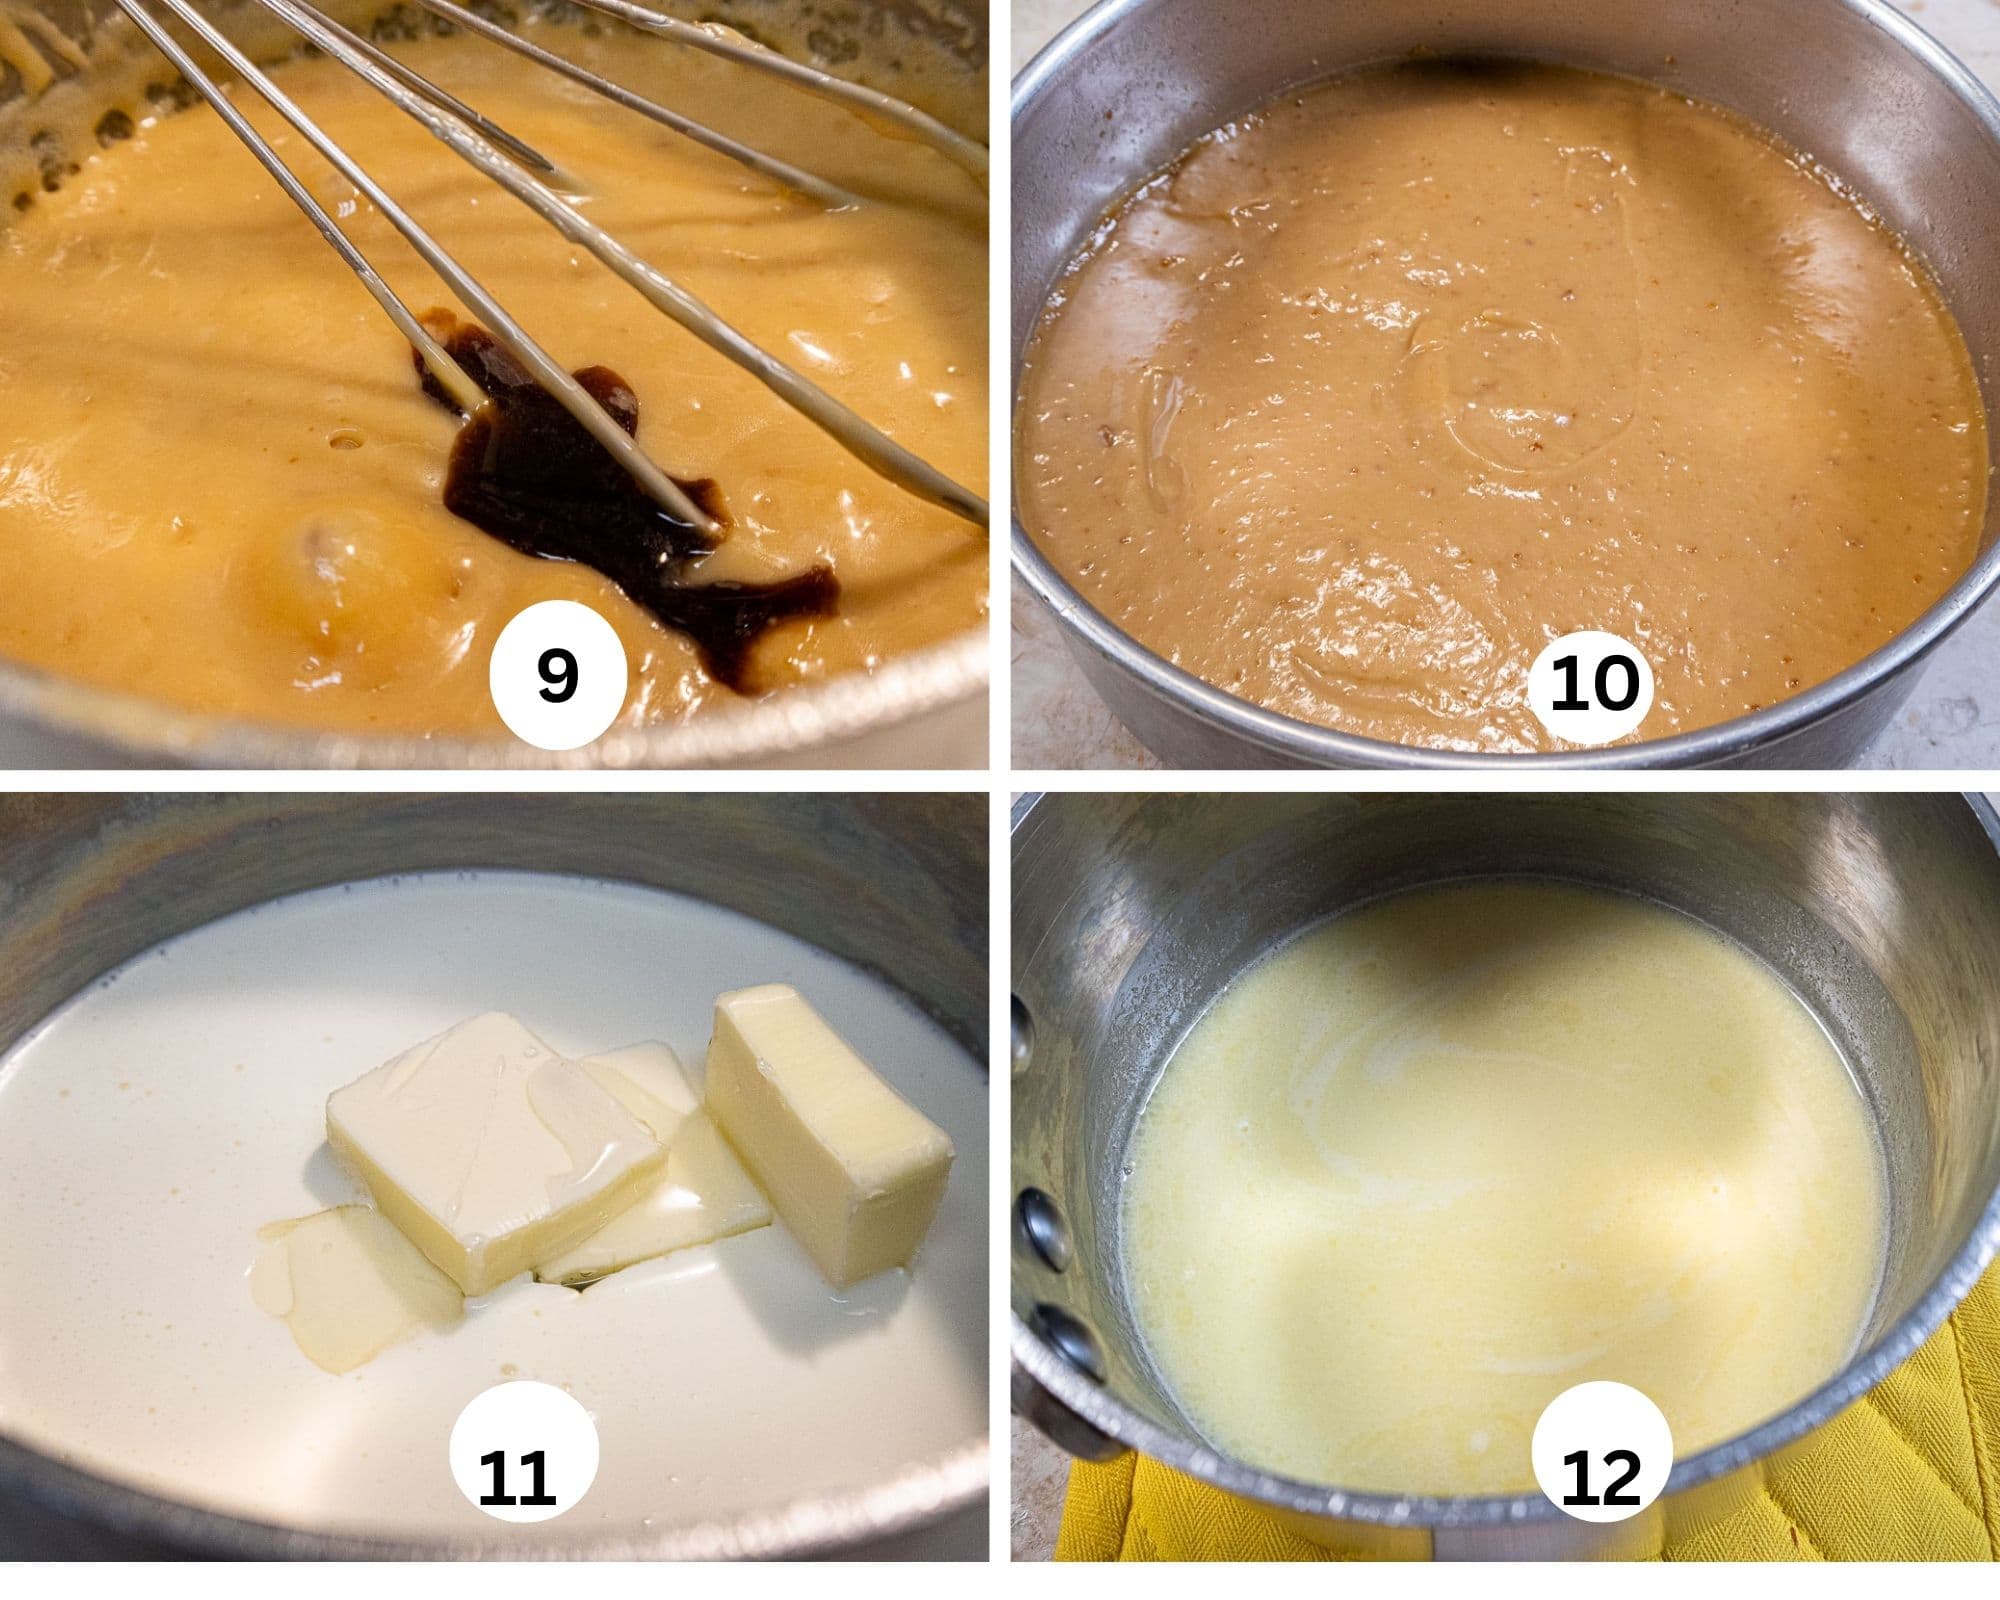 For this collage, the vanilla is whisked into the hot toffee,  spread over the crust and the cream and butter are added to a pan for the chocolate mousse, then melted. 